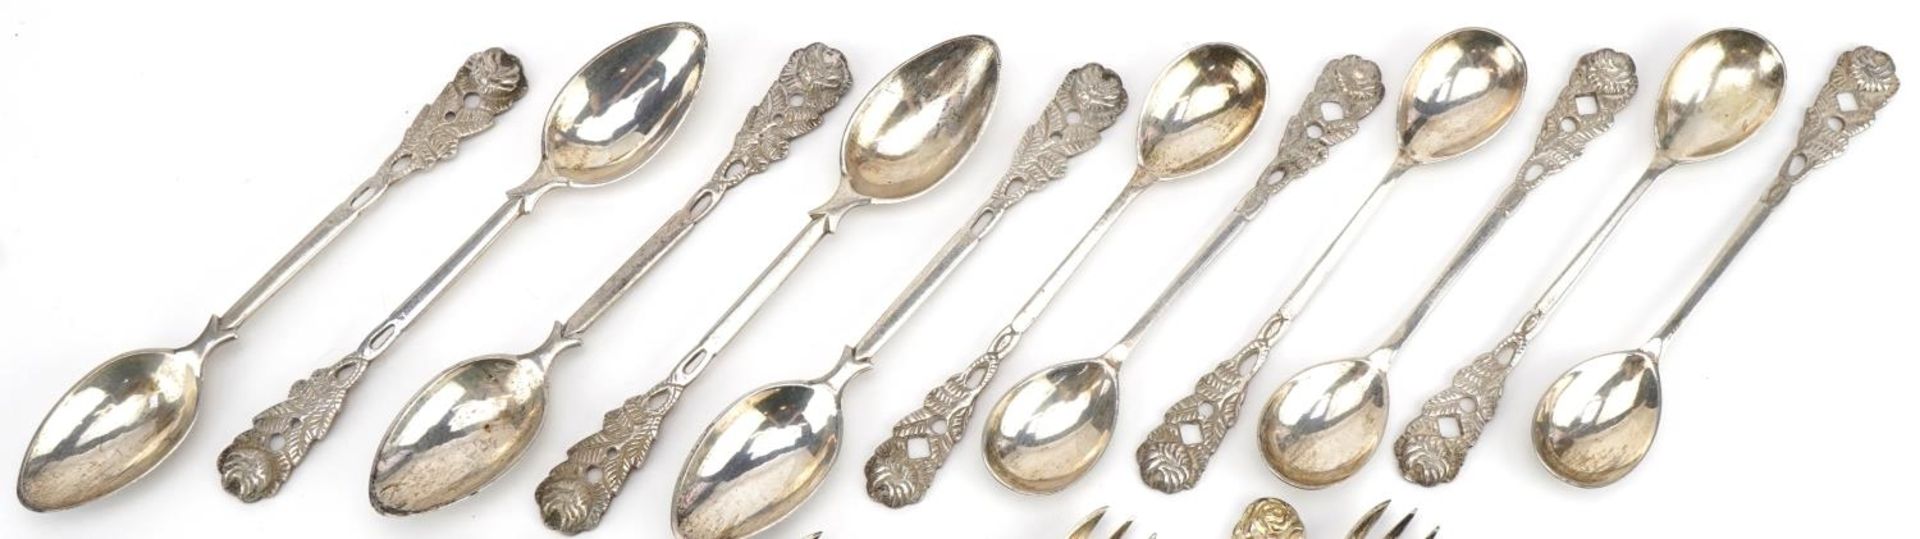 Eighteen 800 grade silver forks and spoons with naturalistic terminals, 12.5cm in length, 290.0g : - Image 2 of 4